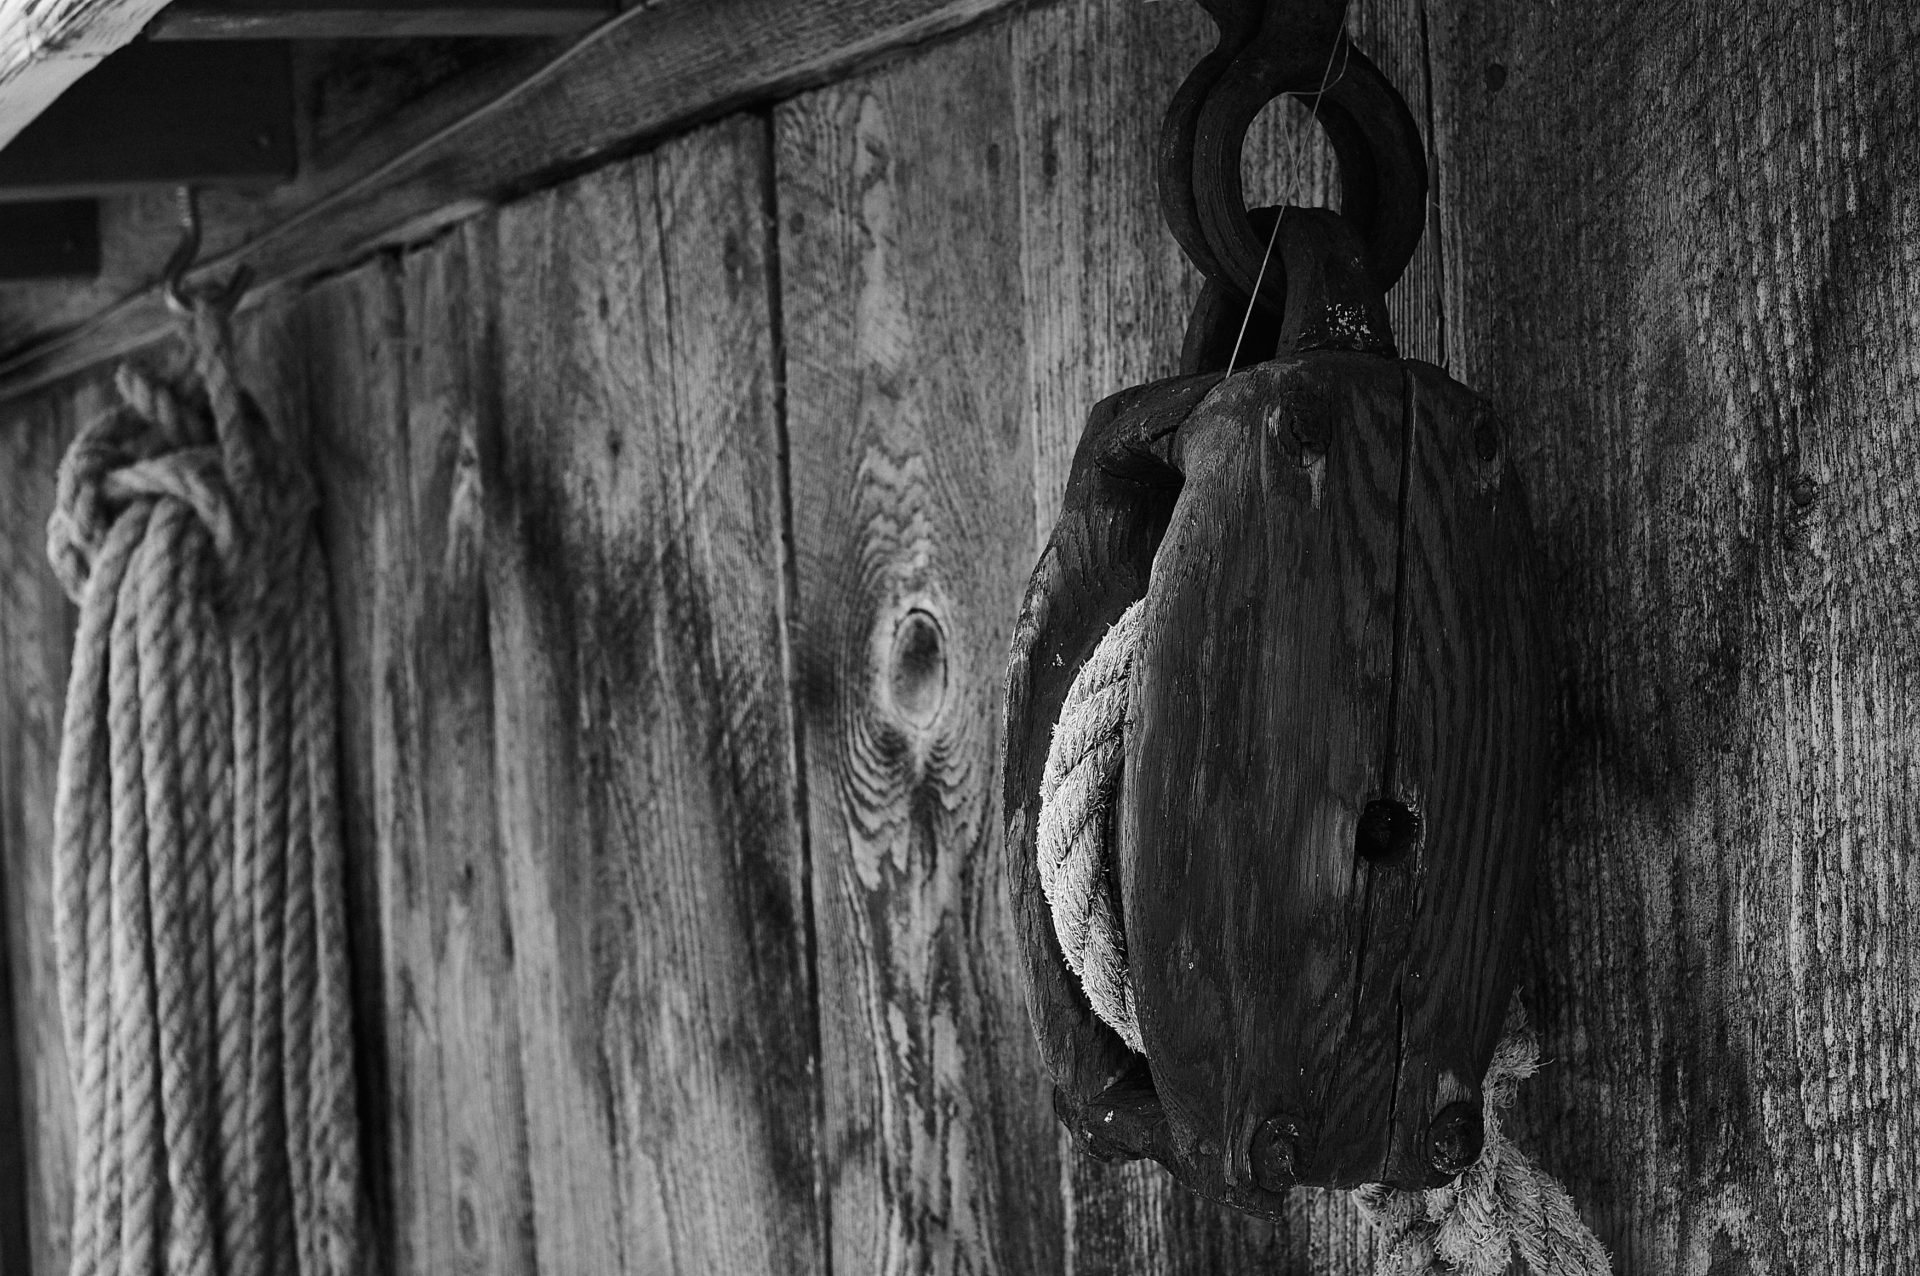 sailing block aka pulley hanging from eve of shanty in the fishing village fishtown Leland Michigan